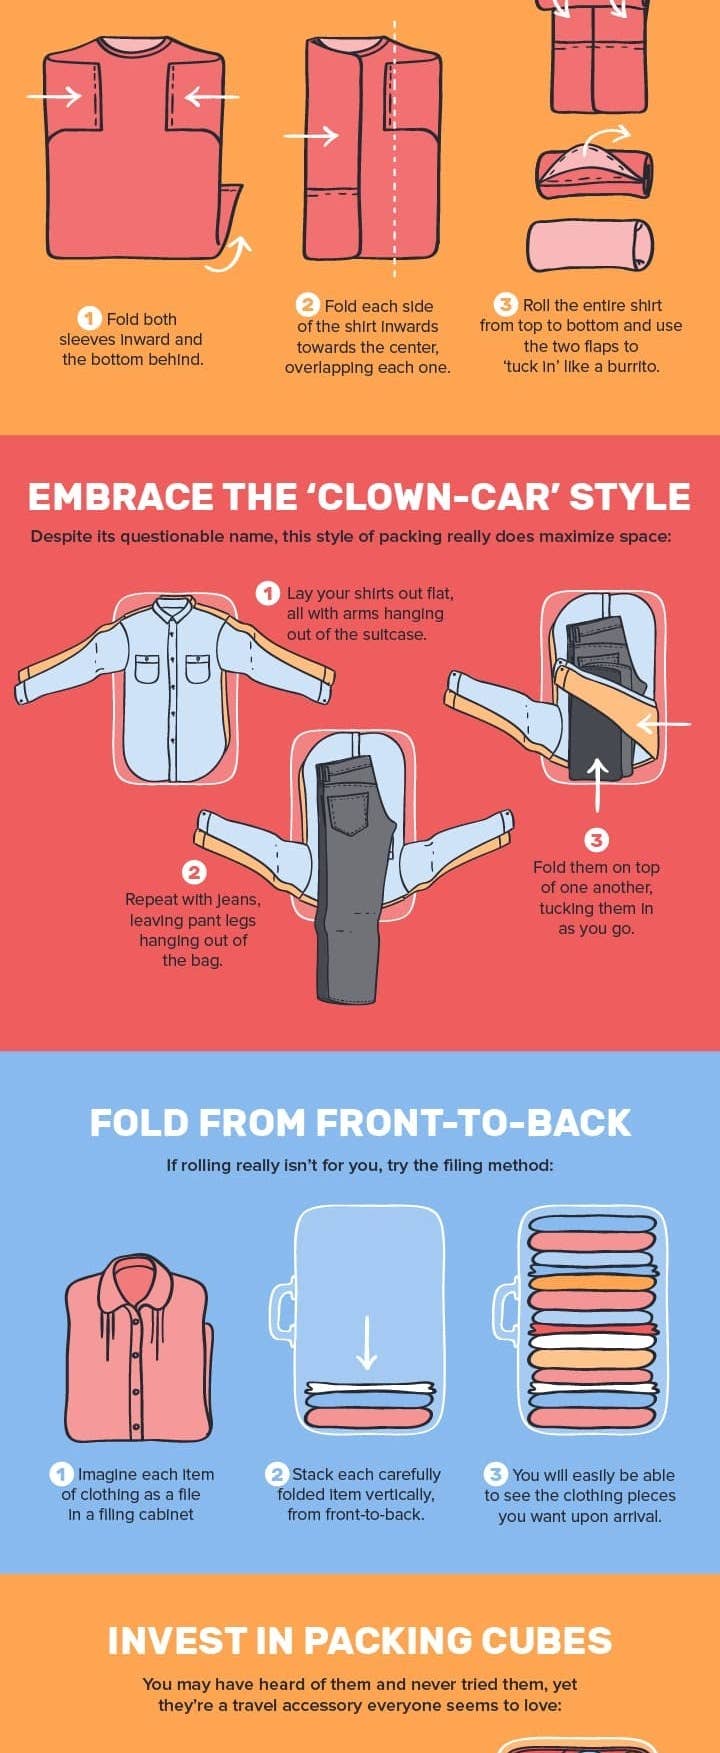 How many clothes to pack for 7 days - The Travel Hack